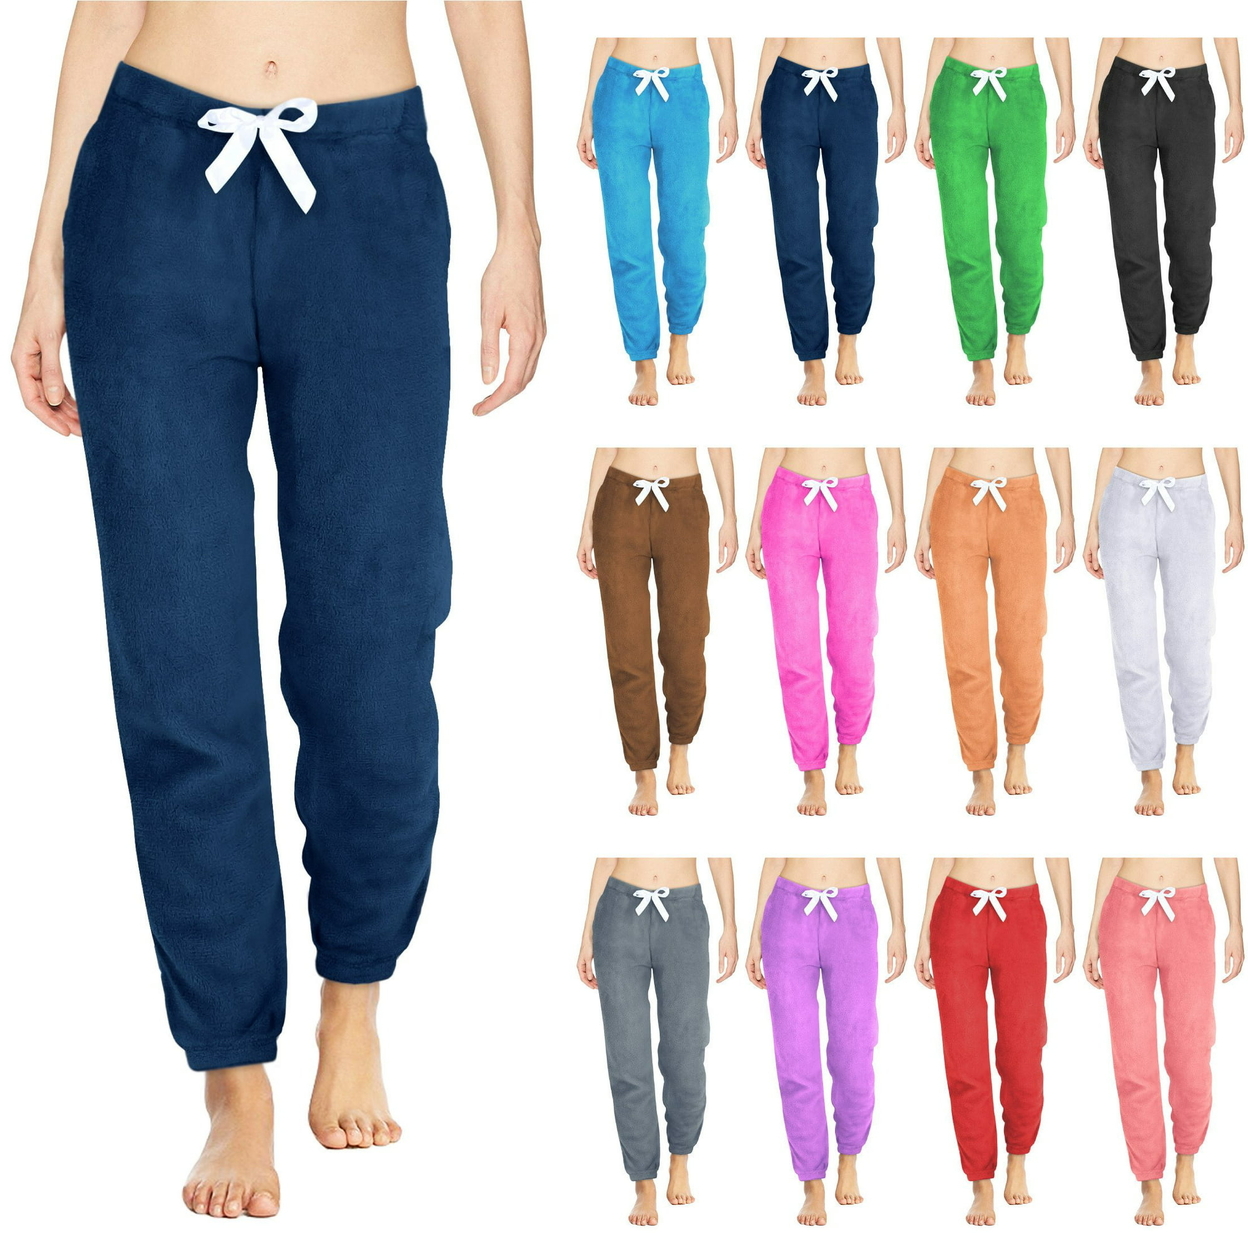 Multi-Pack: Women's Solid & Printed Ultra-Soft Comfy Stretch Micro-Fleece Pajama Lounge Pants - 3-pack, Medium, Solid